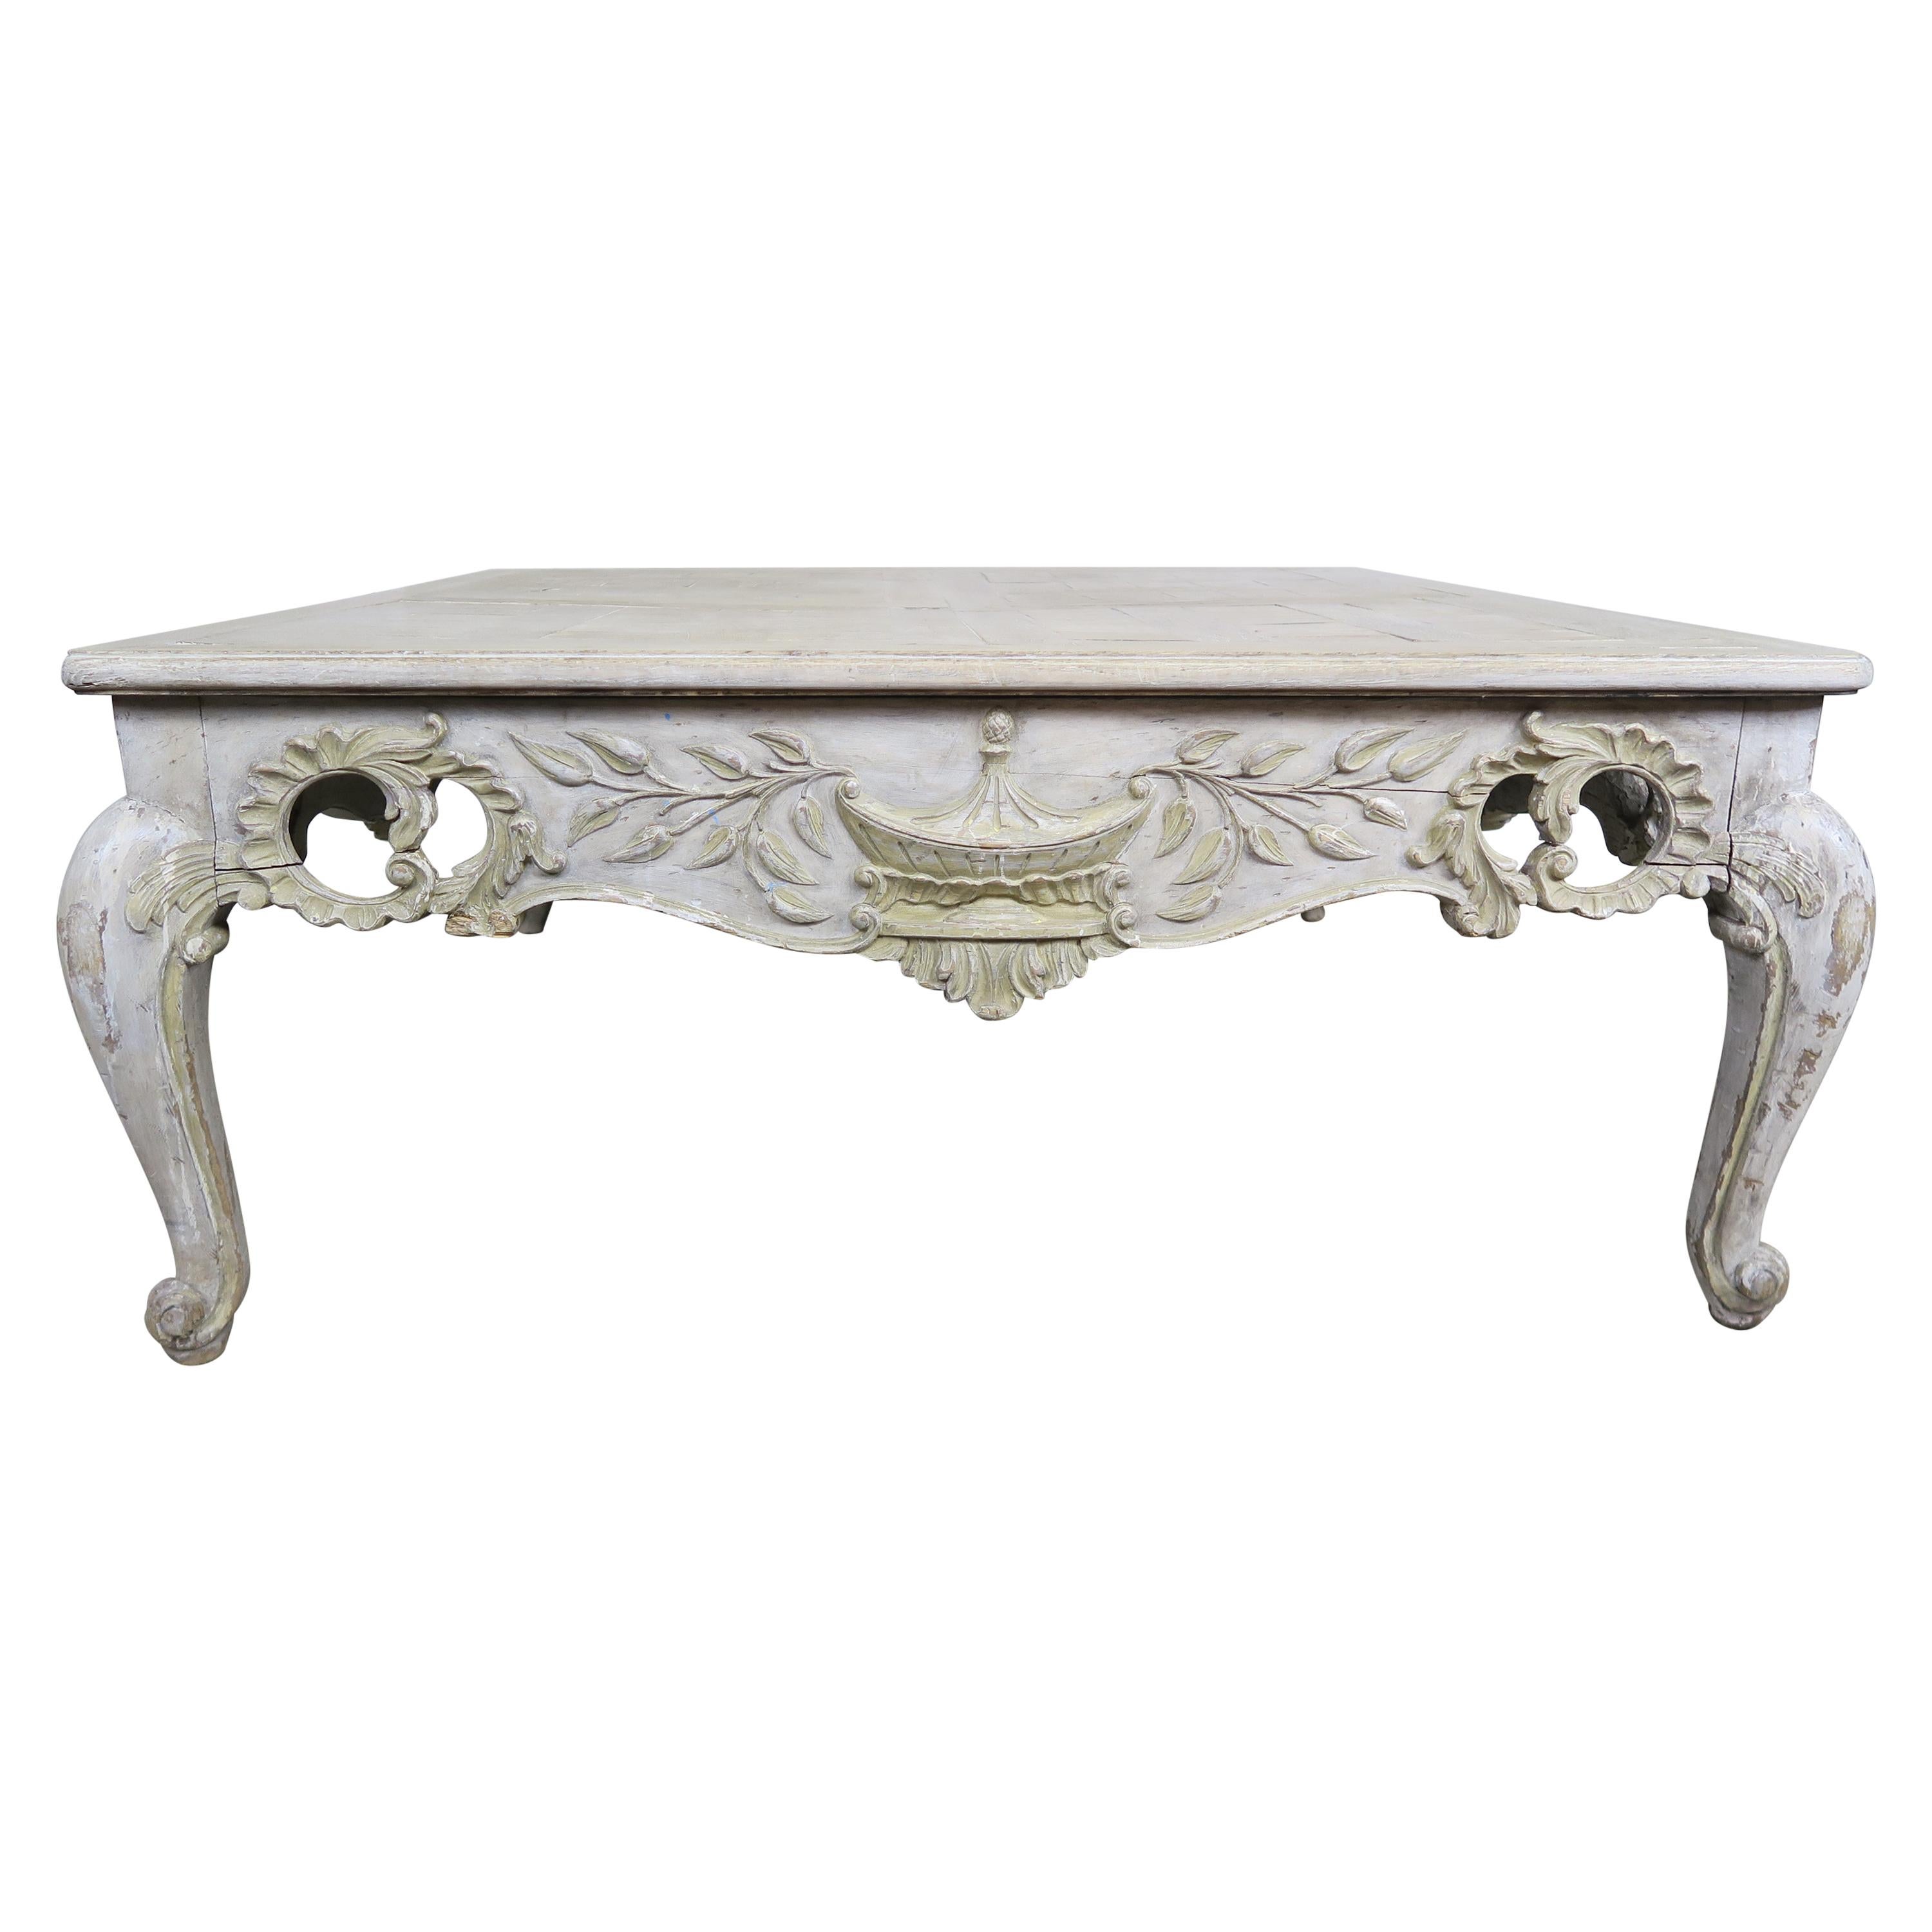 French Provincial Style Carved Wood Painted Coffee Table, circa 1930s